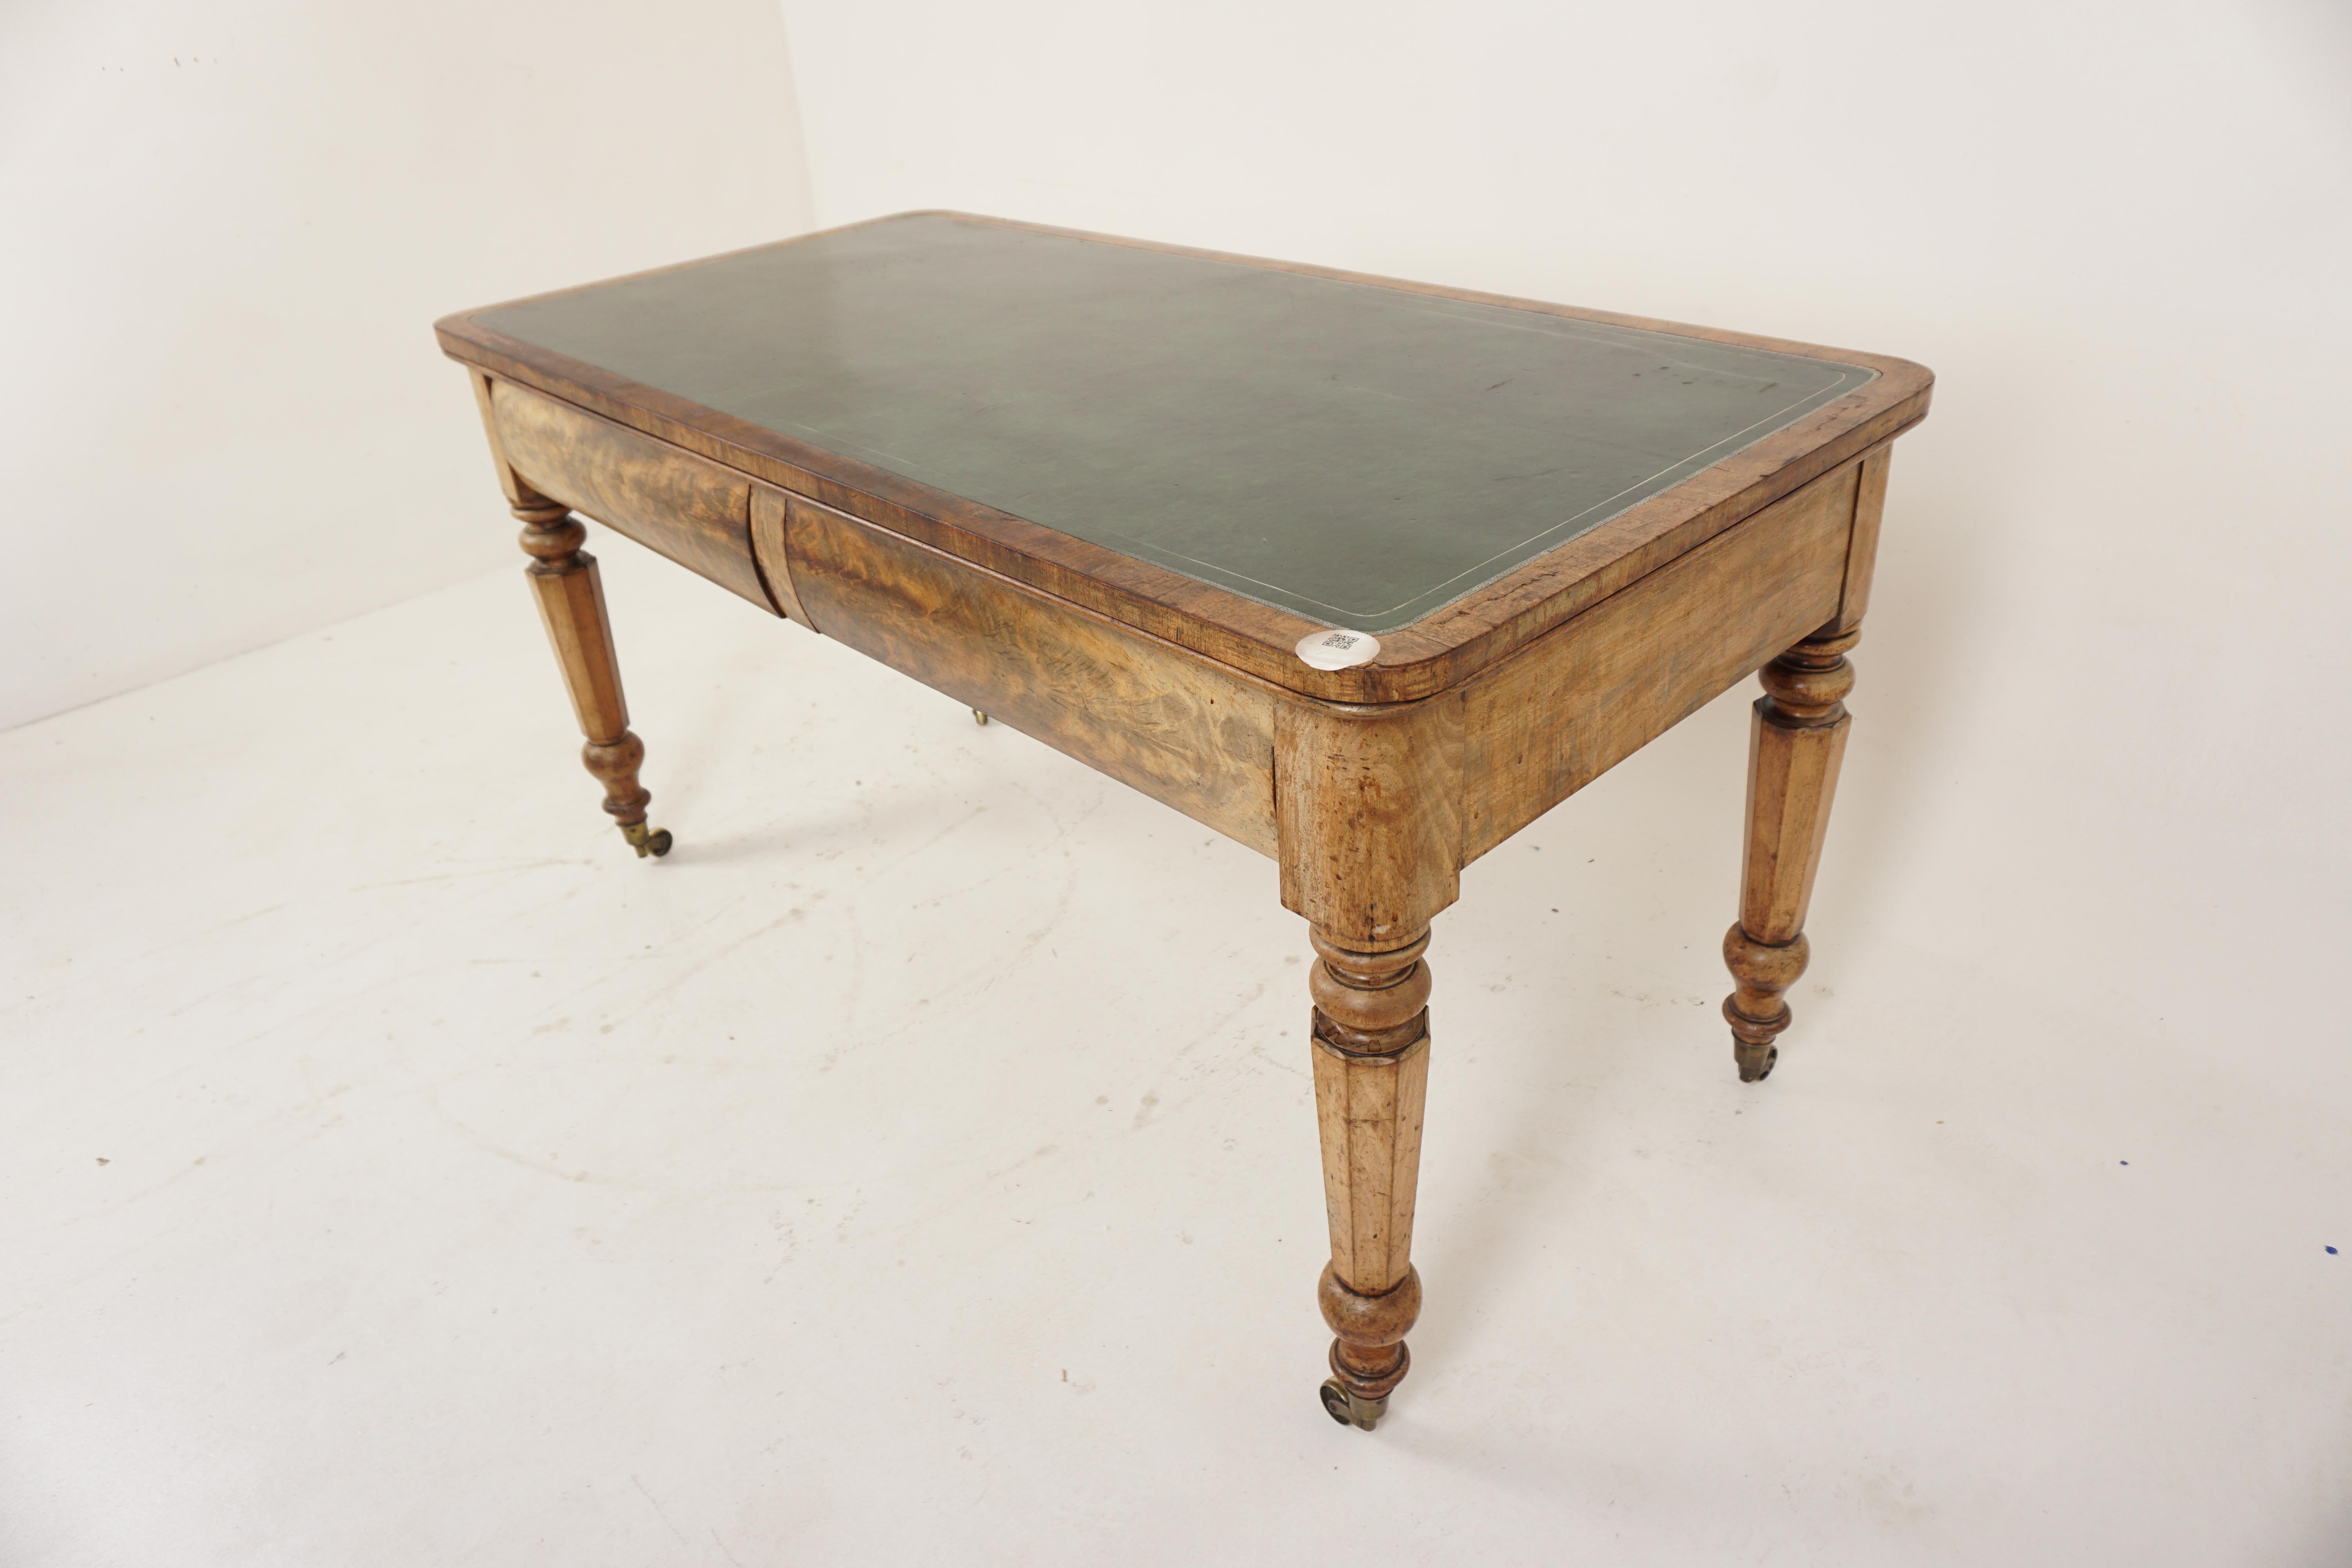 Antique Victorian Walnut free standing writing table, writing desk, Scotland 1840, H672

Scotland 1840
Solid Walnut and Veneers
Original finish
Rectangular top with rounded fore-edges with gilt tooled writing surface
Over a pair of pull out